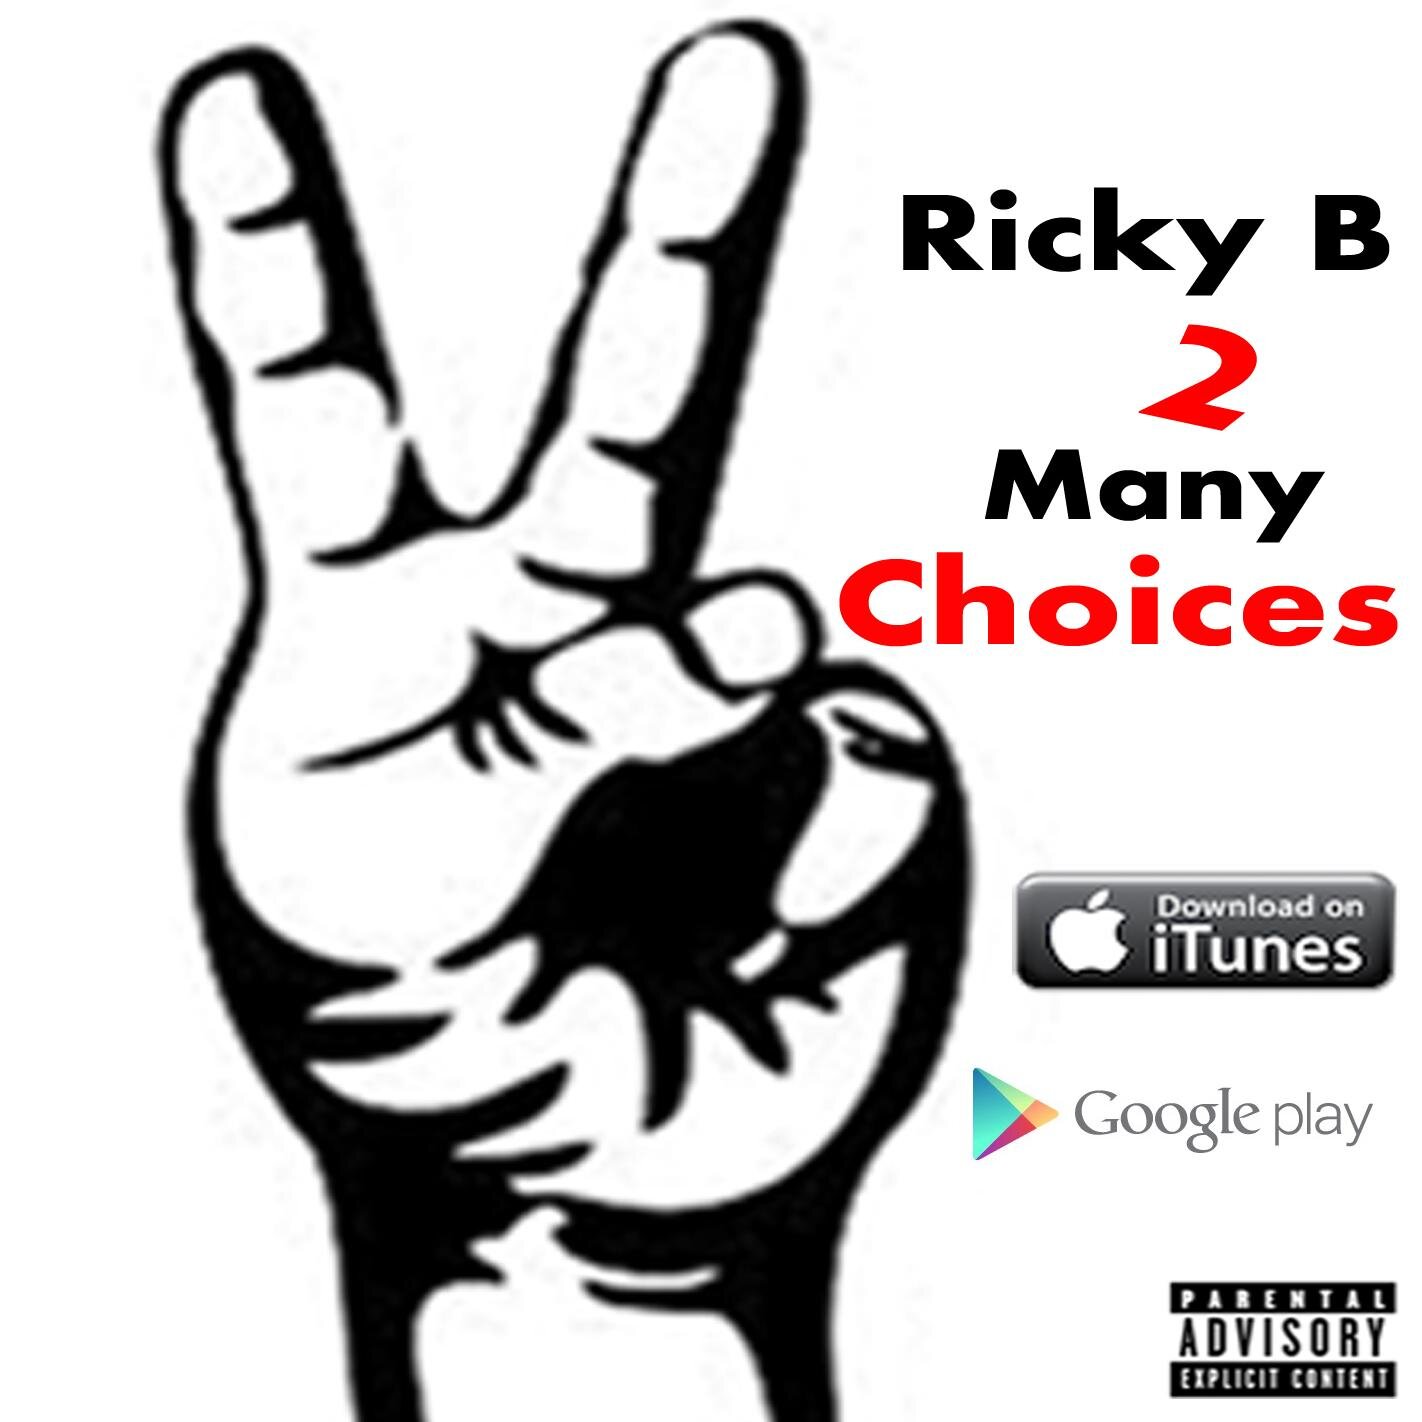 C.E .O .of Dedicated Southern Boys LLC Download New Single Release Of Ricky B 2 Many Choices http://t.co/rVmw4tRu1l…